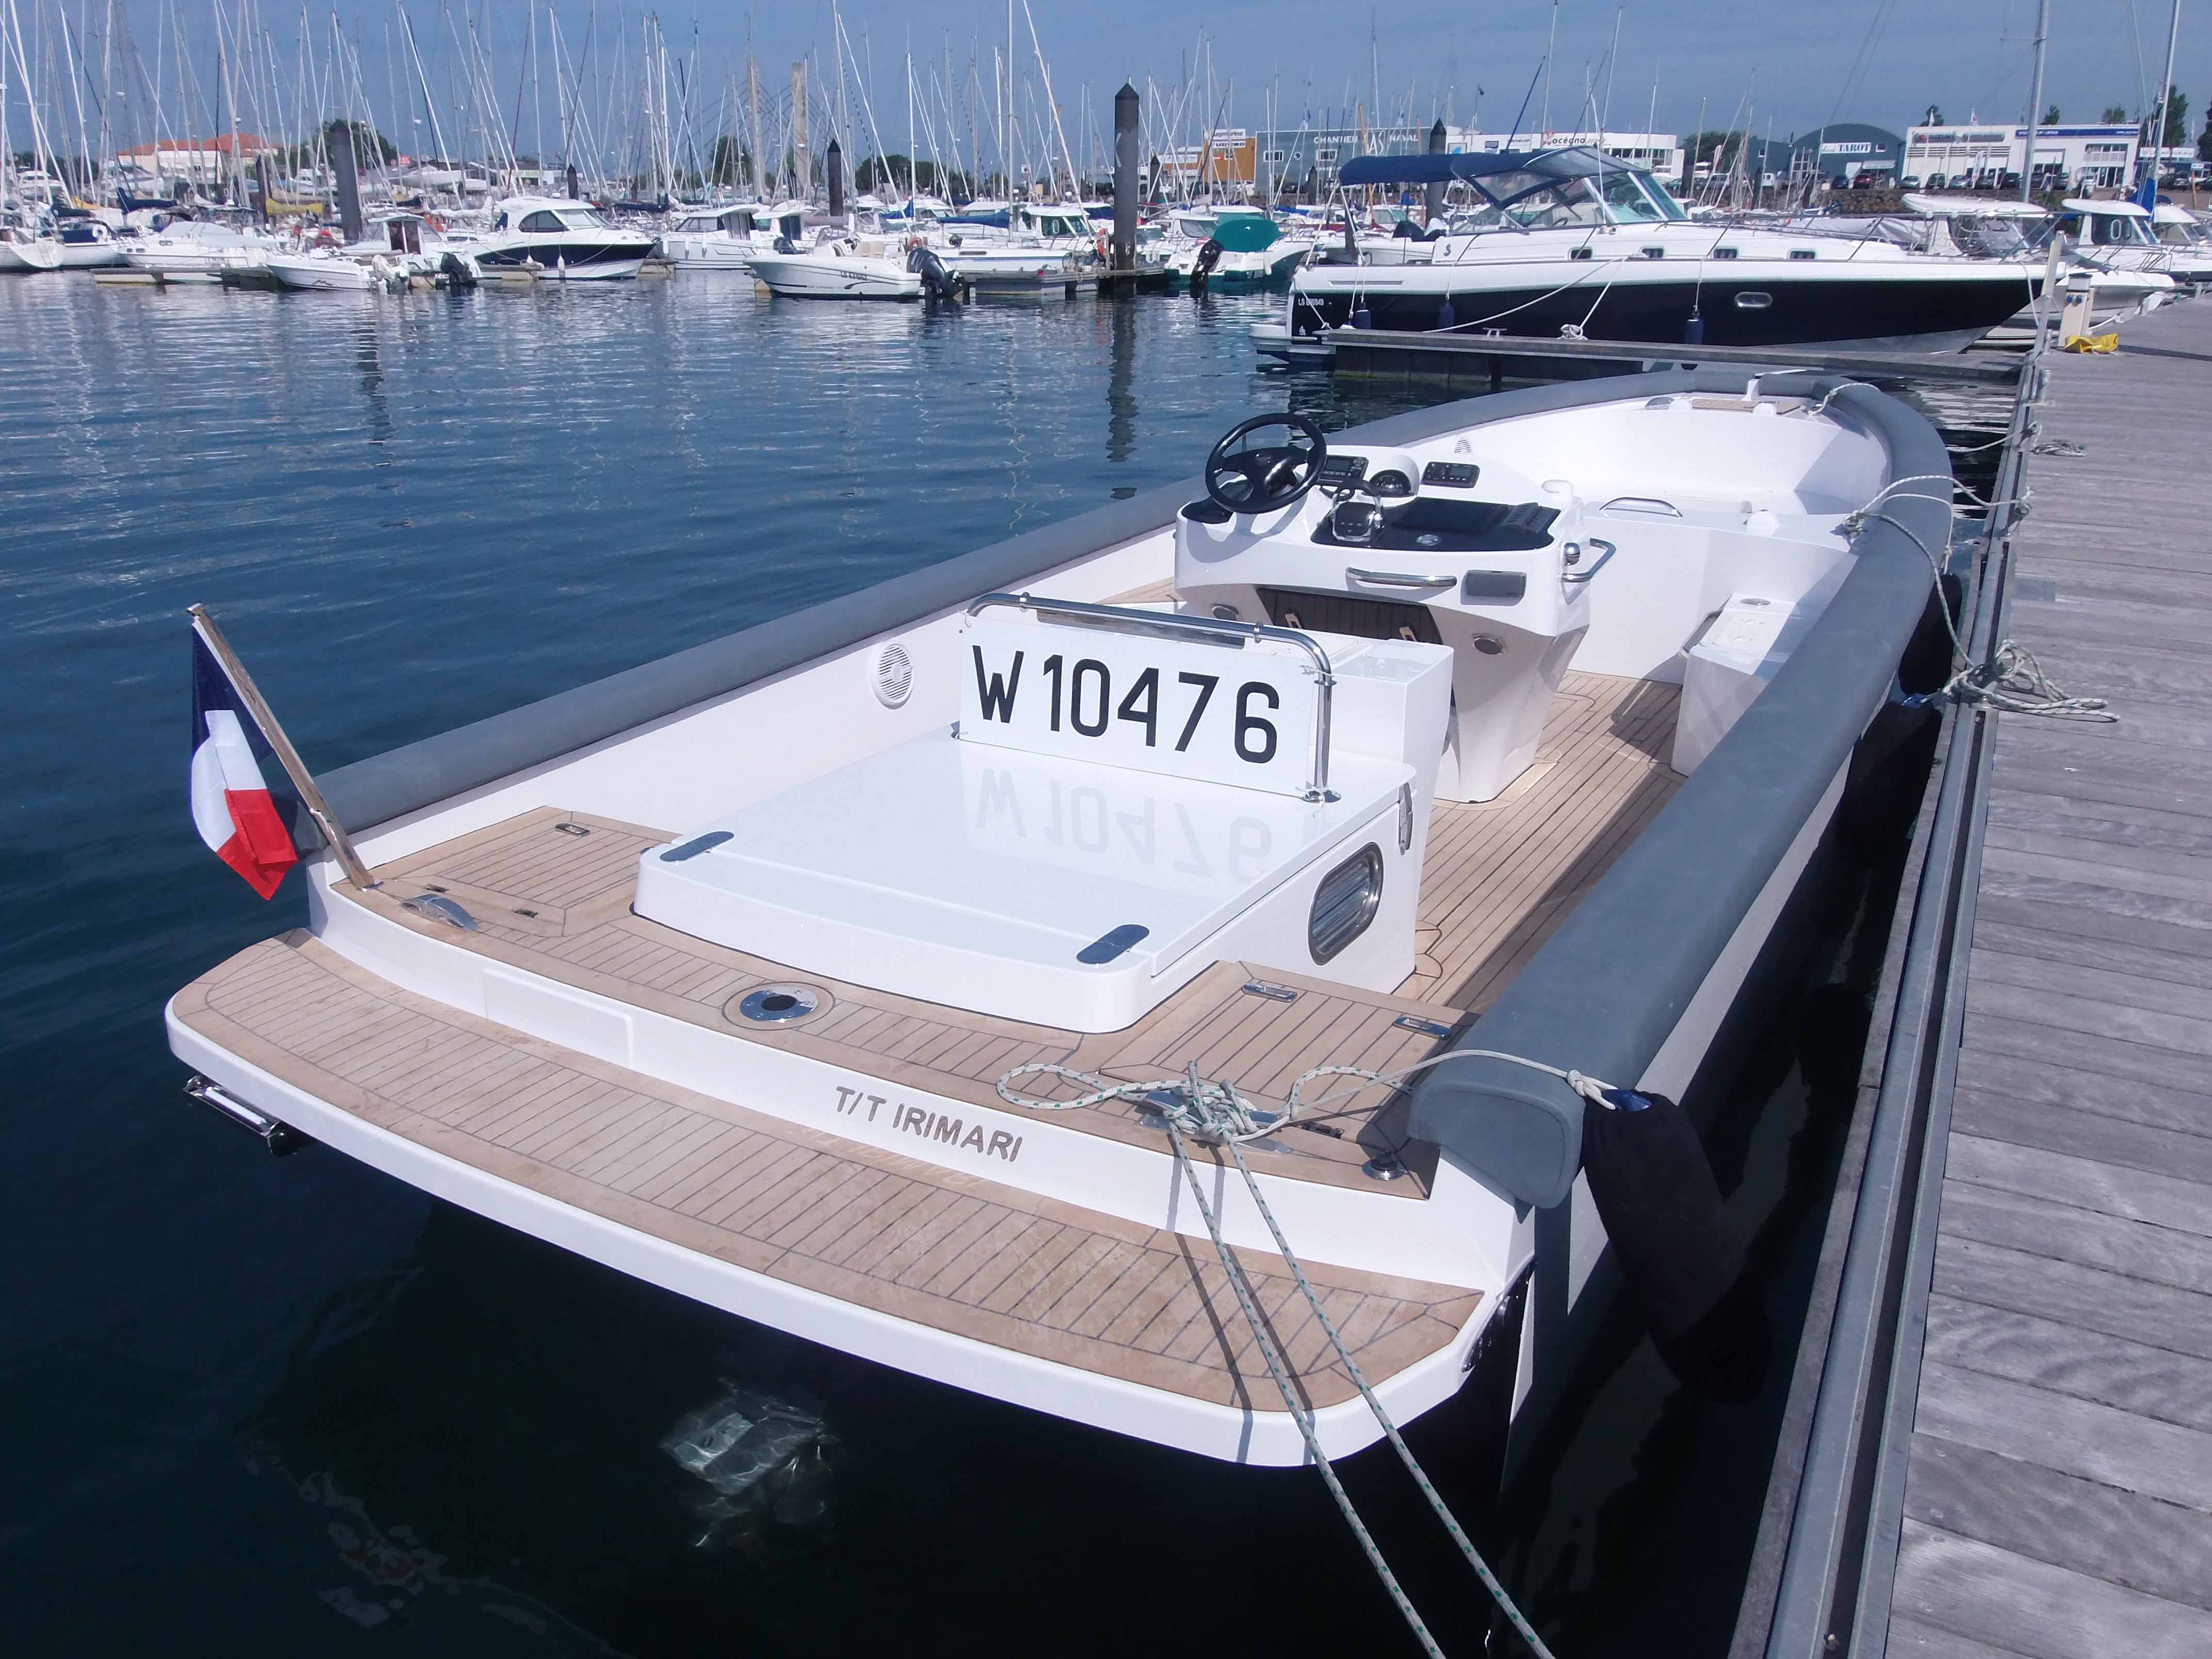 TS85 Open tender by Tender Shipyard for superyacht IRIMARI by Sunrise Yachts